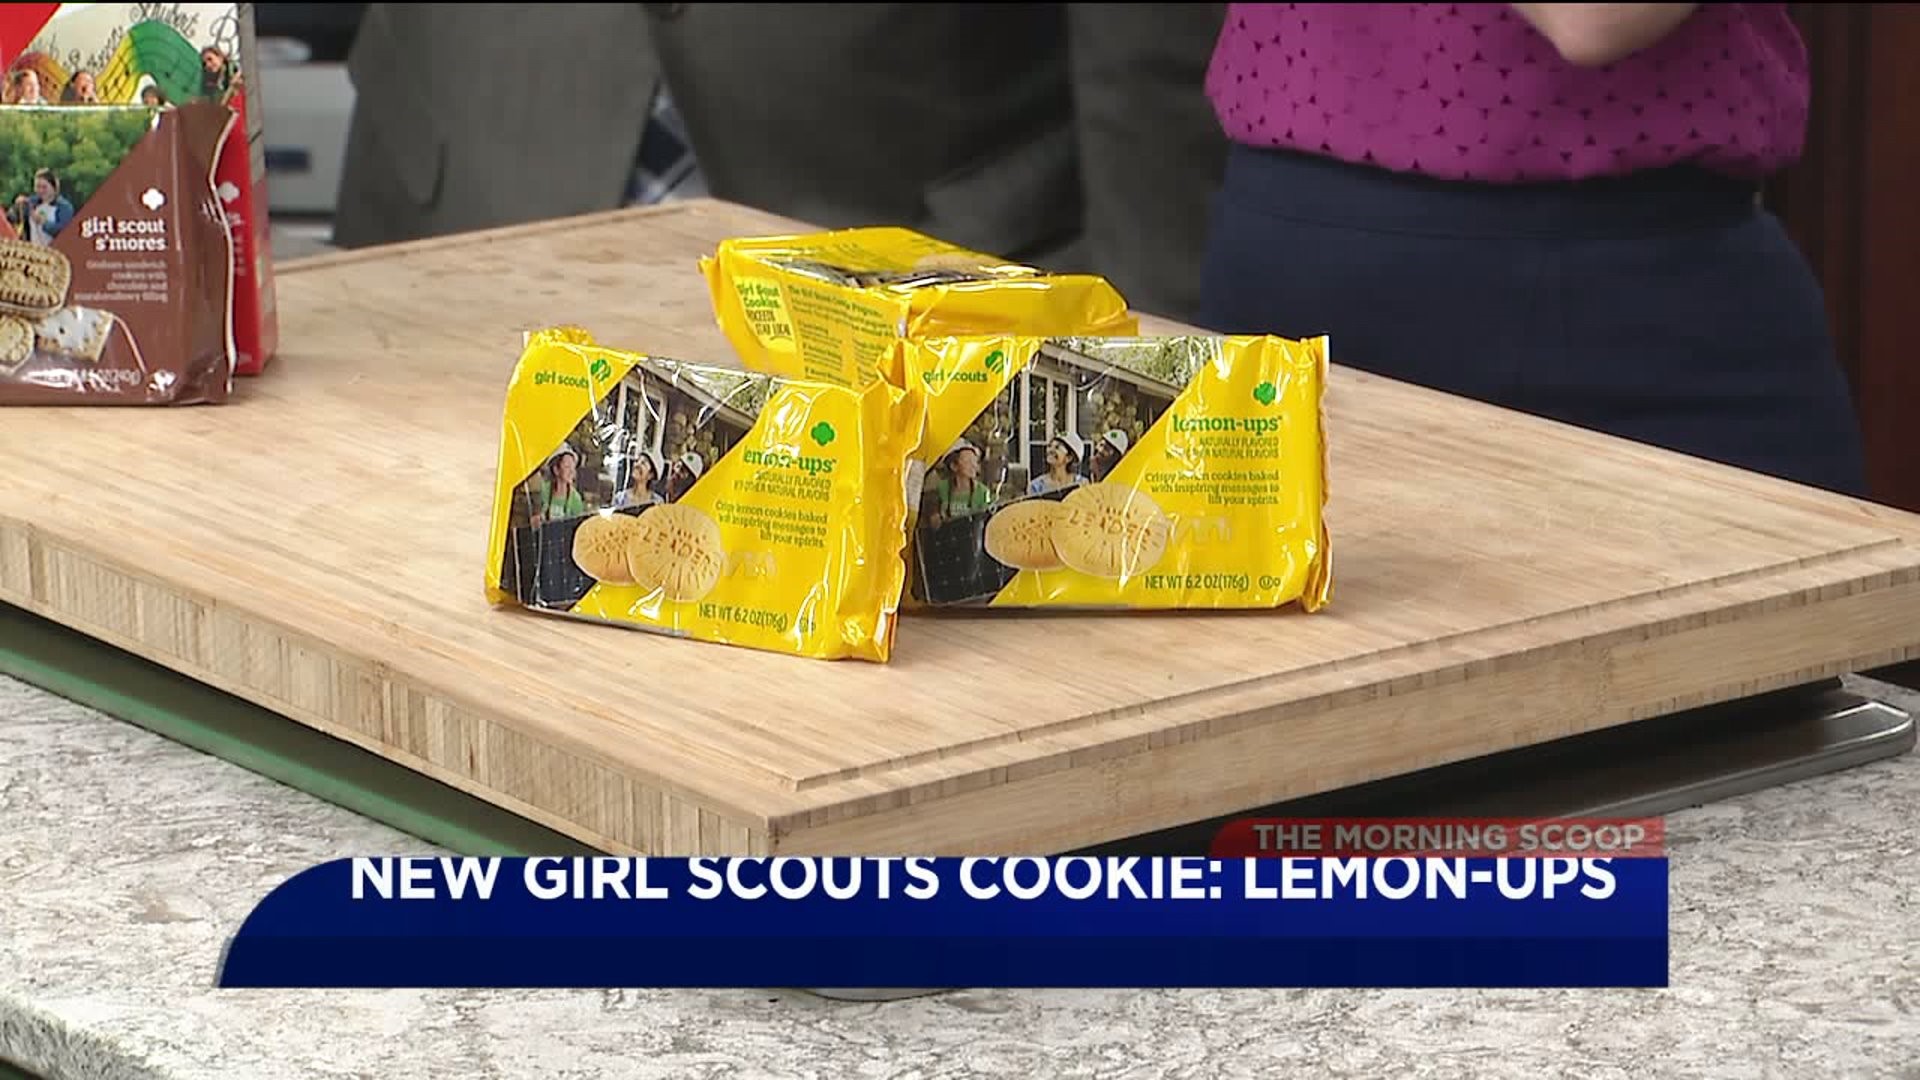 New Girl Scout Cookie for 2020